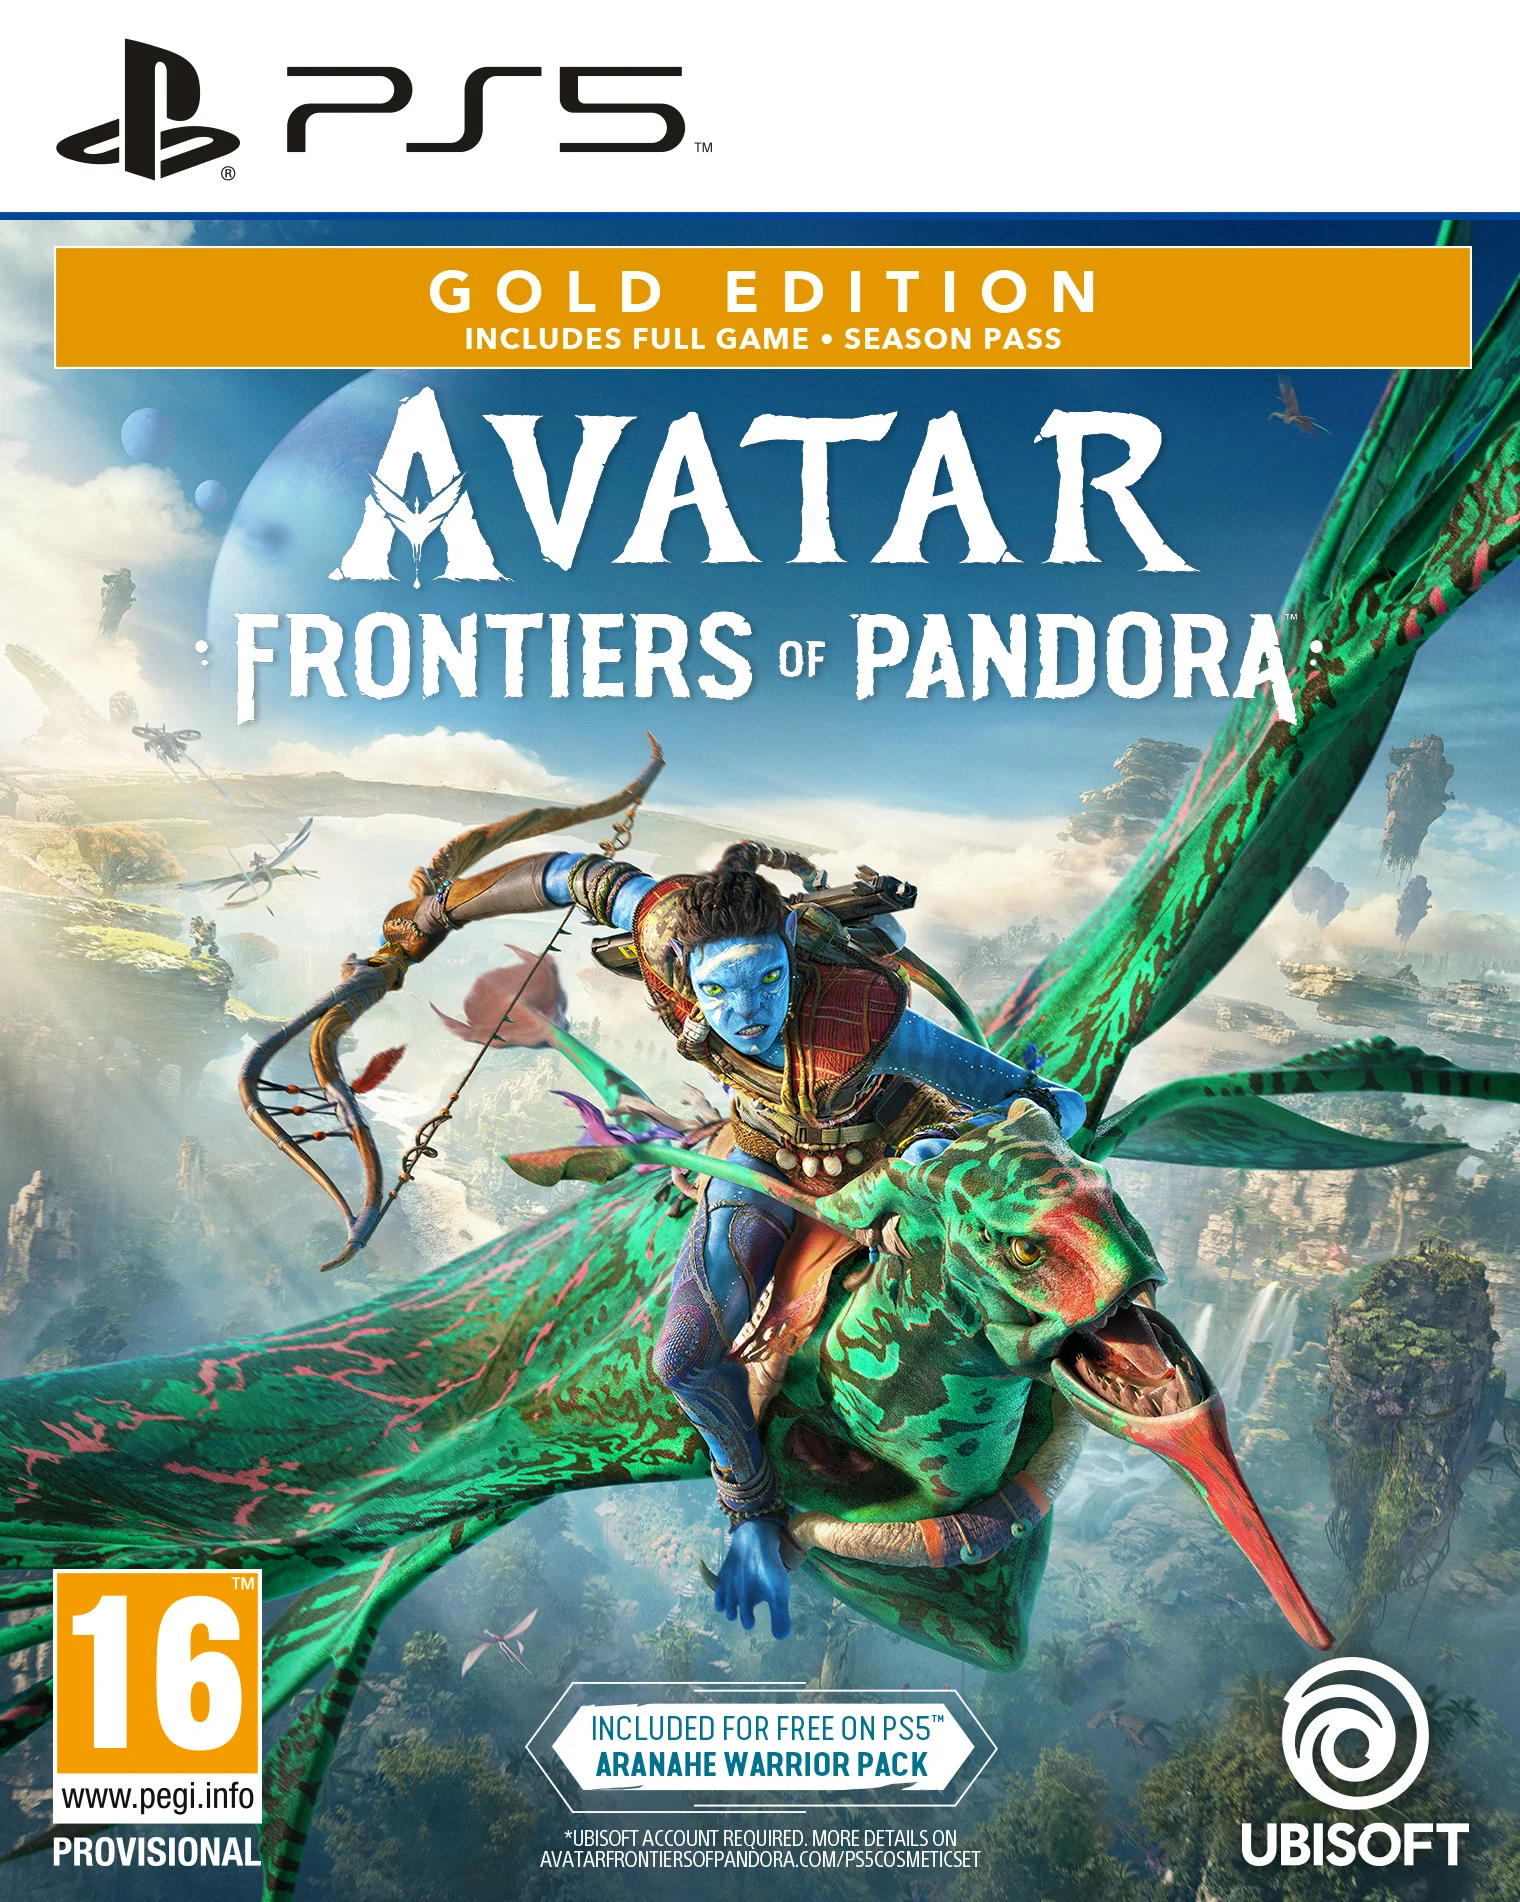 Avatar Frontiers of Pandora - Gold Edition - PS5